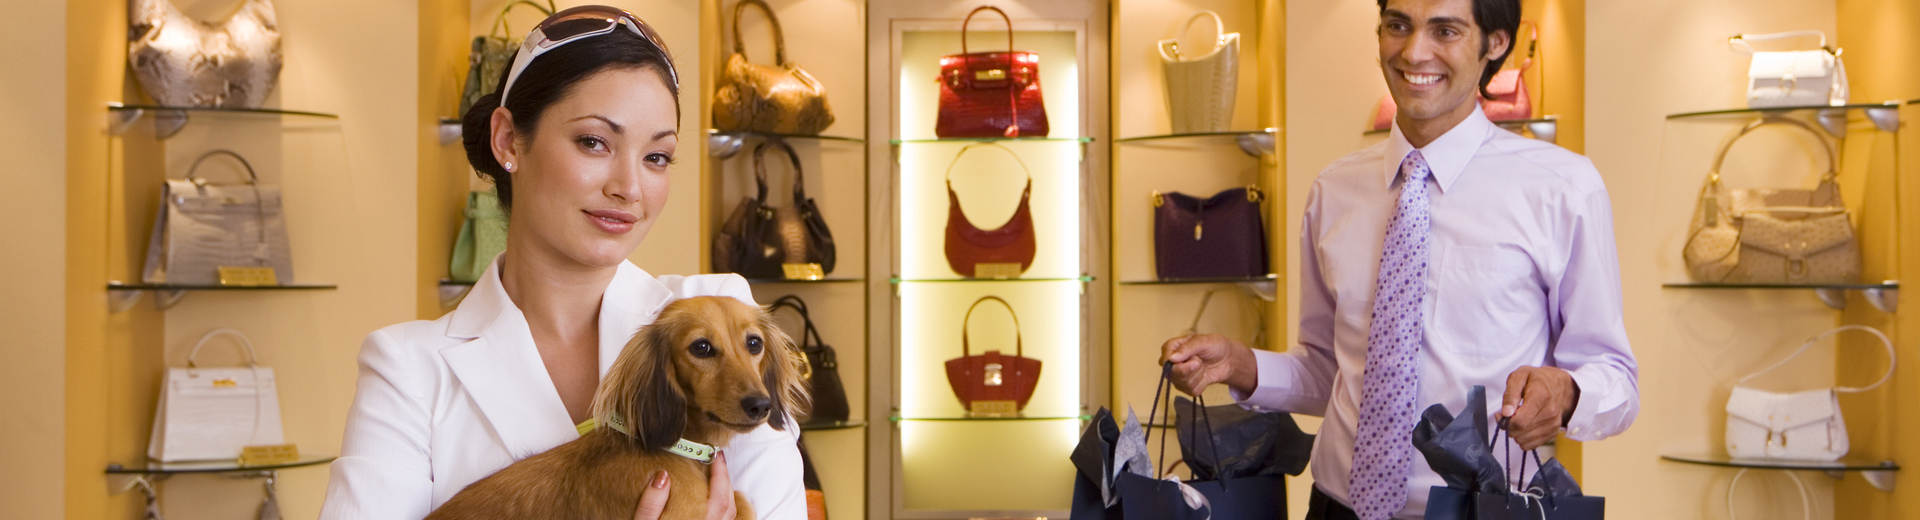 7 Tips for Shopping at Luxury Stores